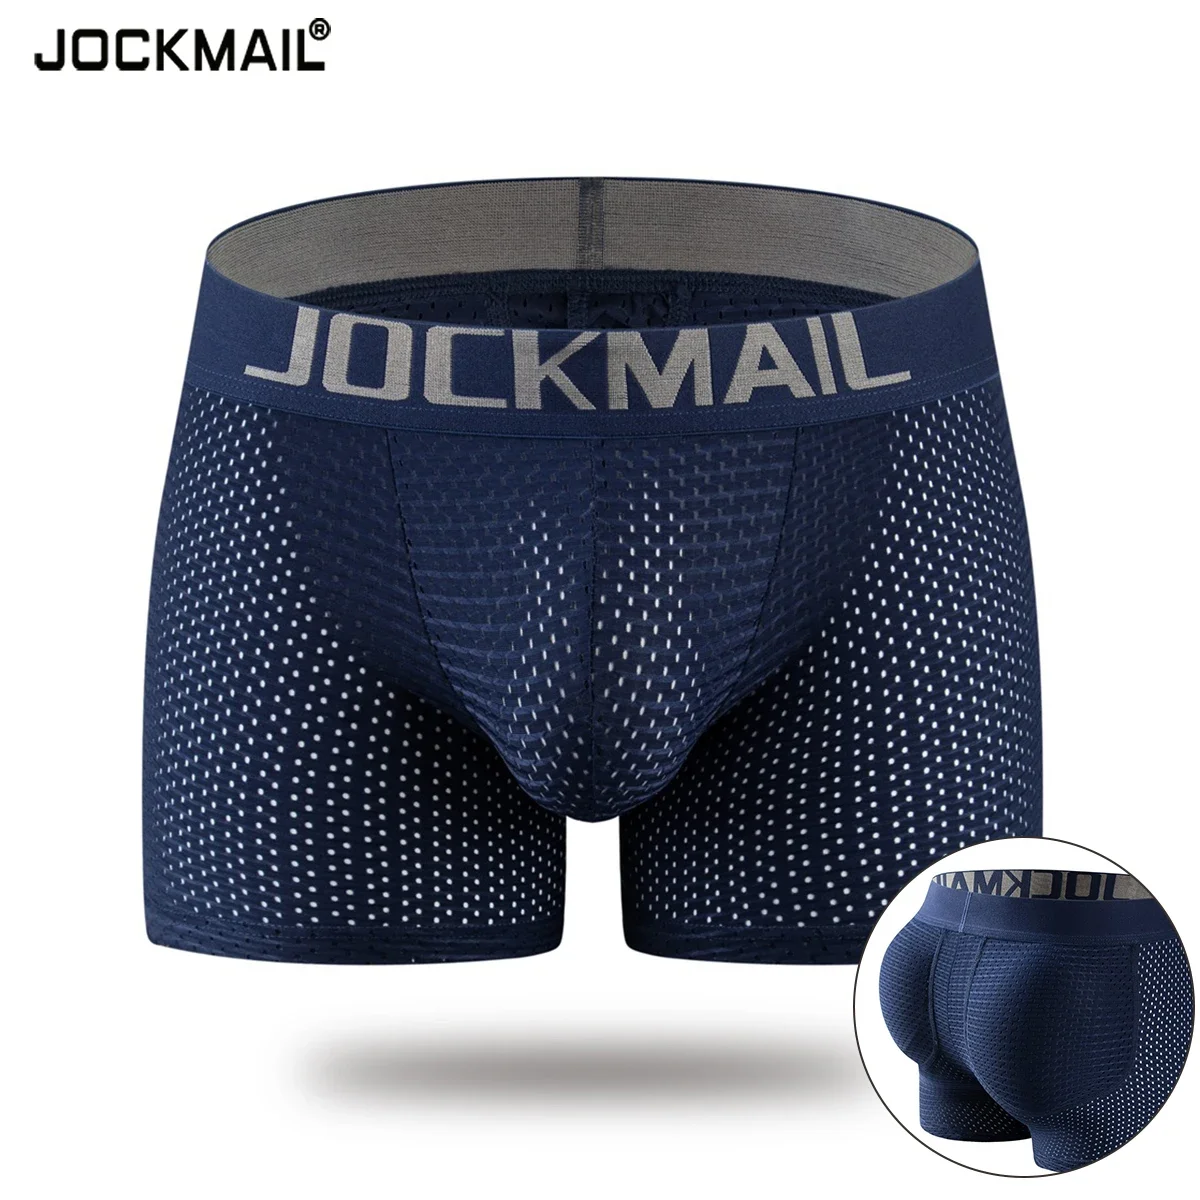 JOCKMAIL Sexy Underwear Men's Boxer Shorts Mesh U Pouch Sexy Underpants with Hip Pads Cueca Boxer Men Sleep Bottoms Male Trunks